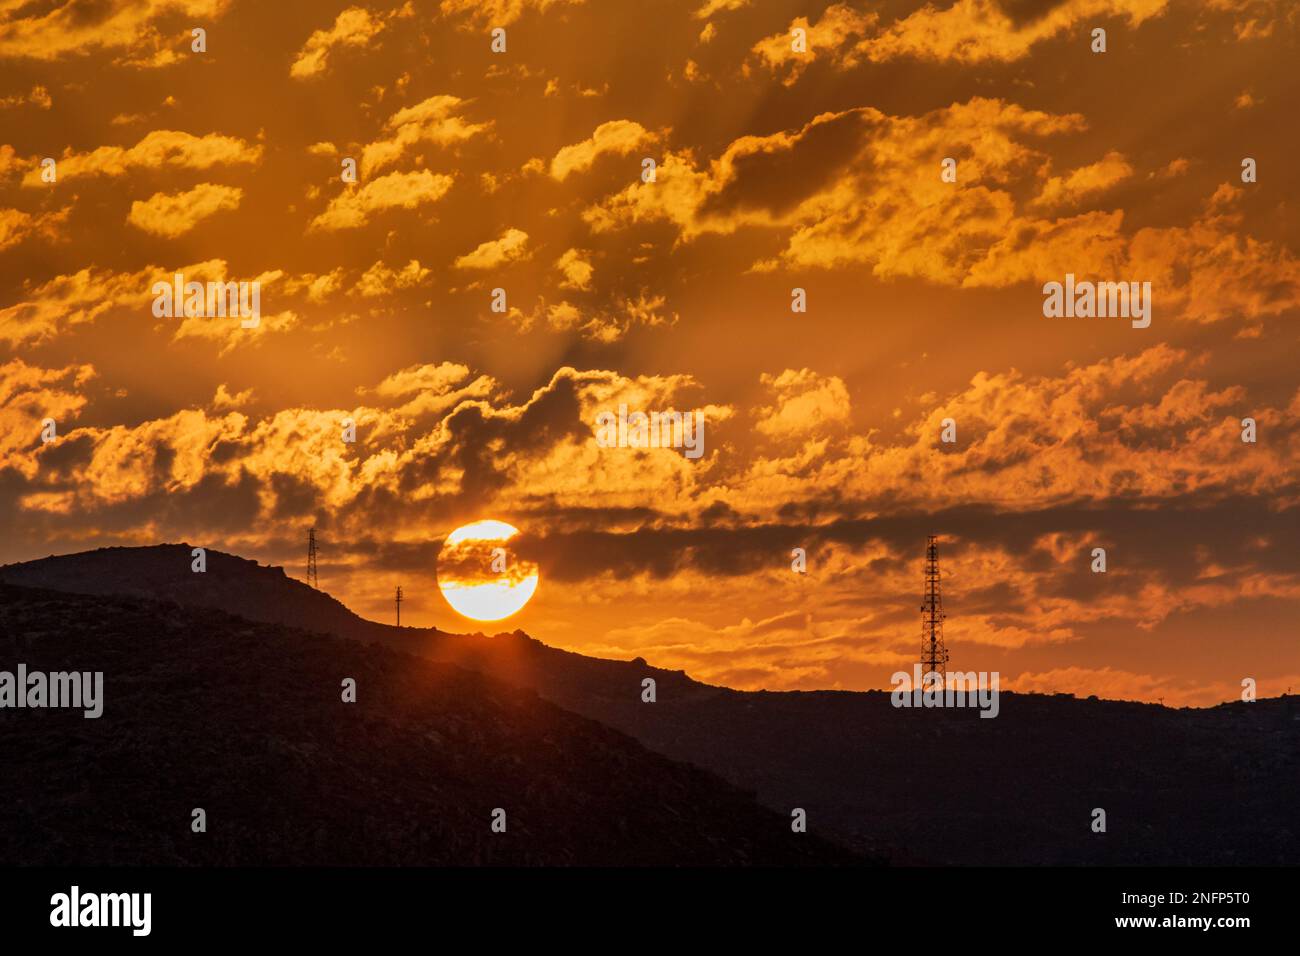 setting sun behind hill with pylons Stock Photo